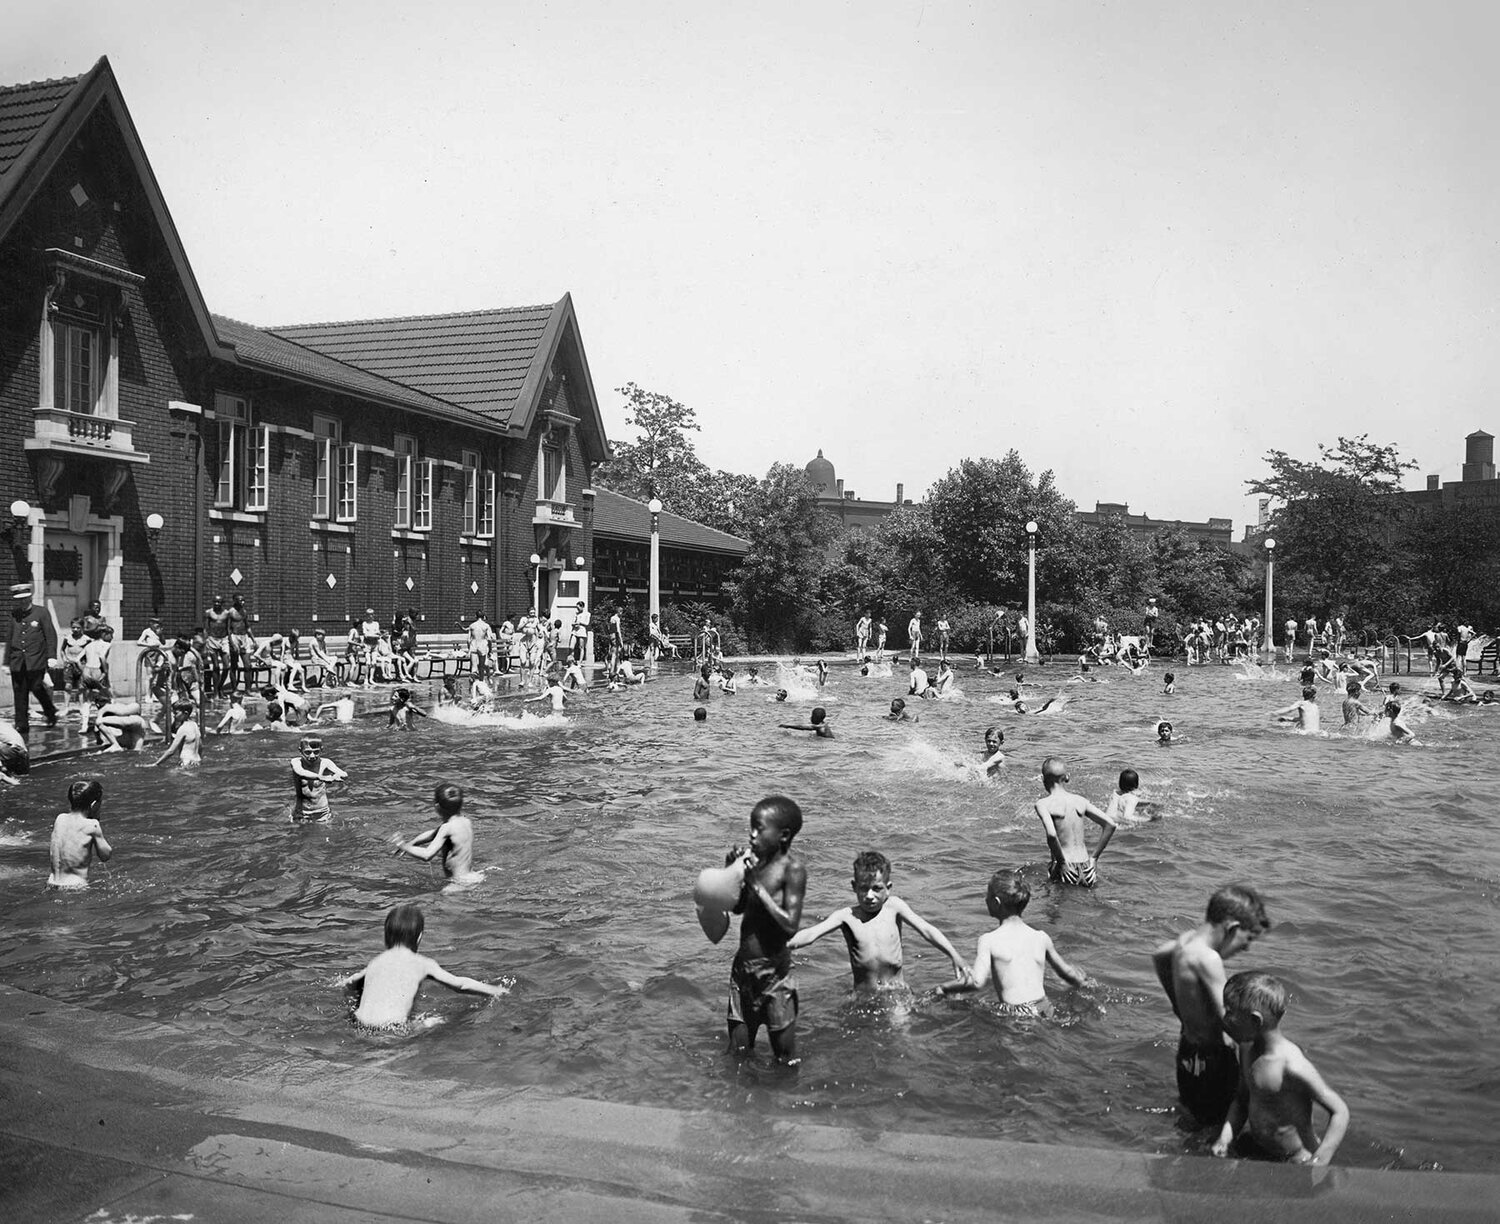  Union Park’s integrated swimming pool, ca. 1920. Chicago Park District Records: Photographs, Special Collections, Chicago Public Library. 